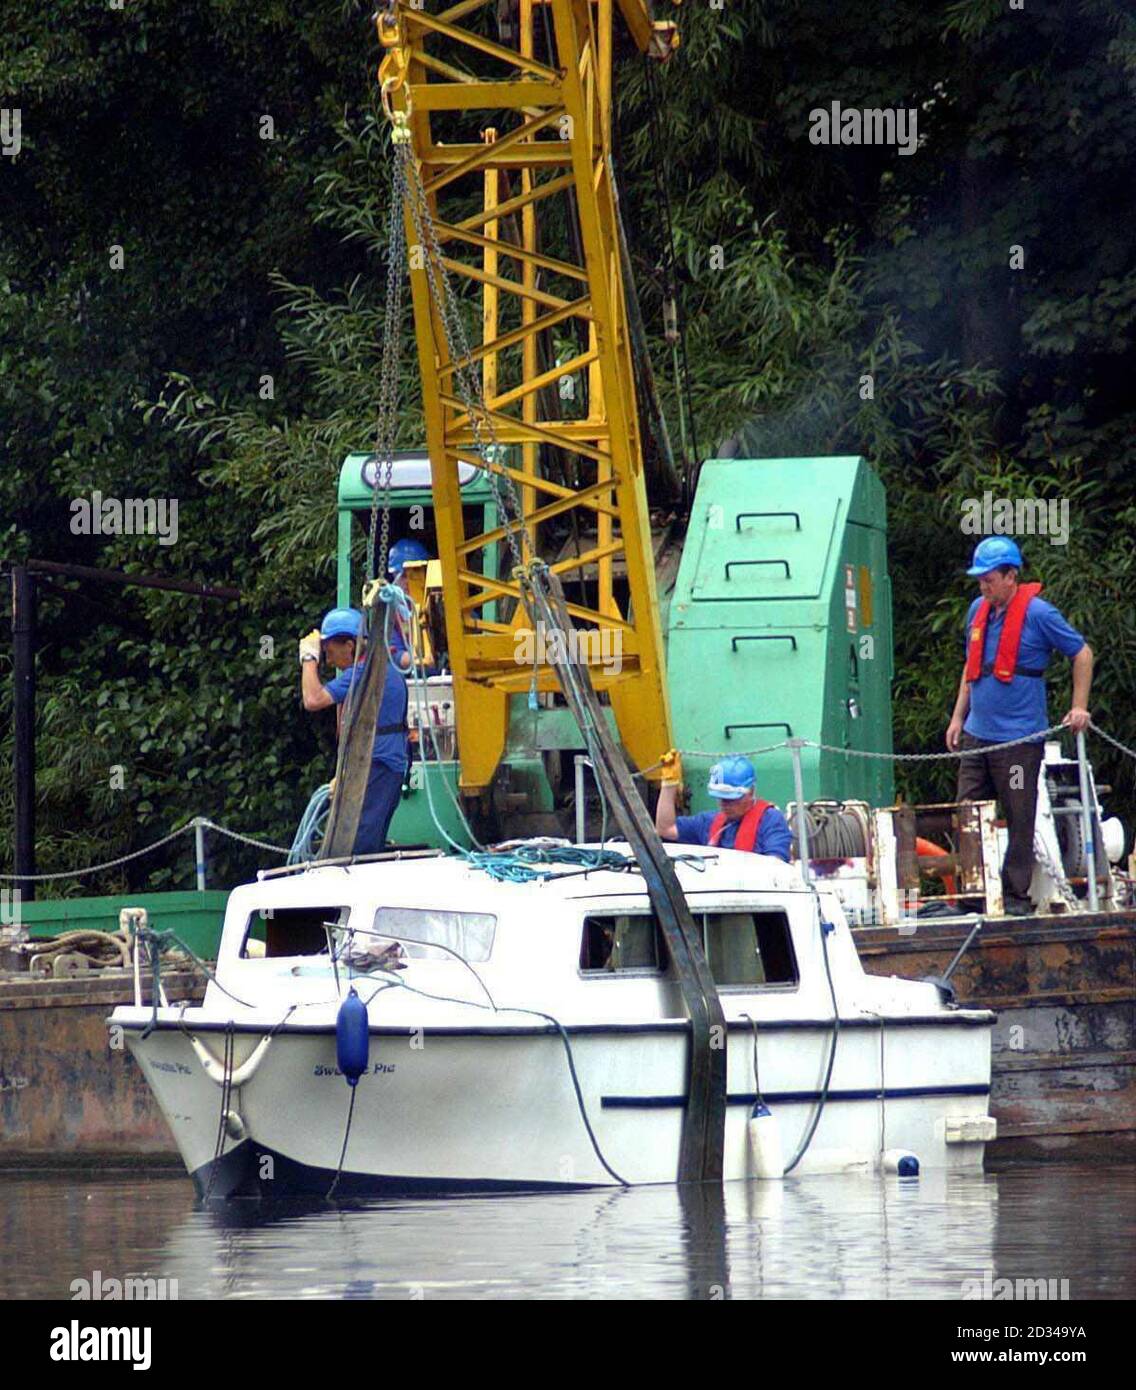 Tax worker Jane Turner drowned when a seriously overloaded pleasure cruiser she was partying on capsized and sank, a court heard. Three people were charged with manslaughter following the incident, which happened during the annual Stourport-on-Severn Land and River Carnival, on September 6 2003. Stock Photo